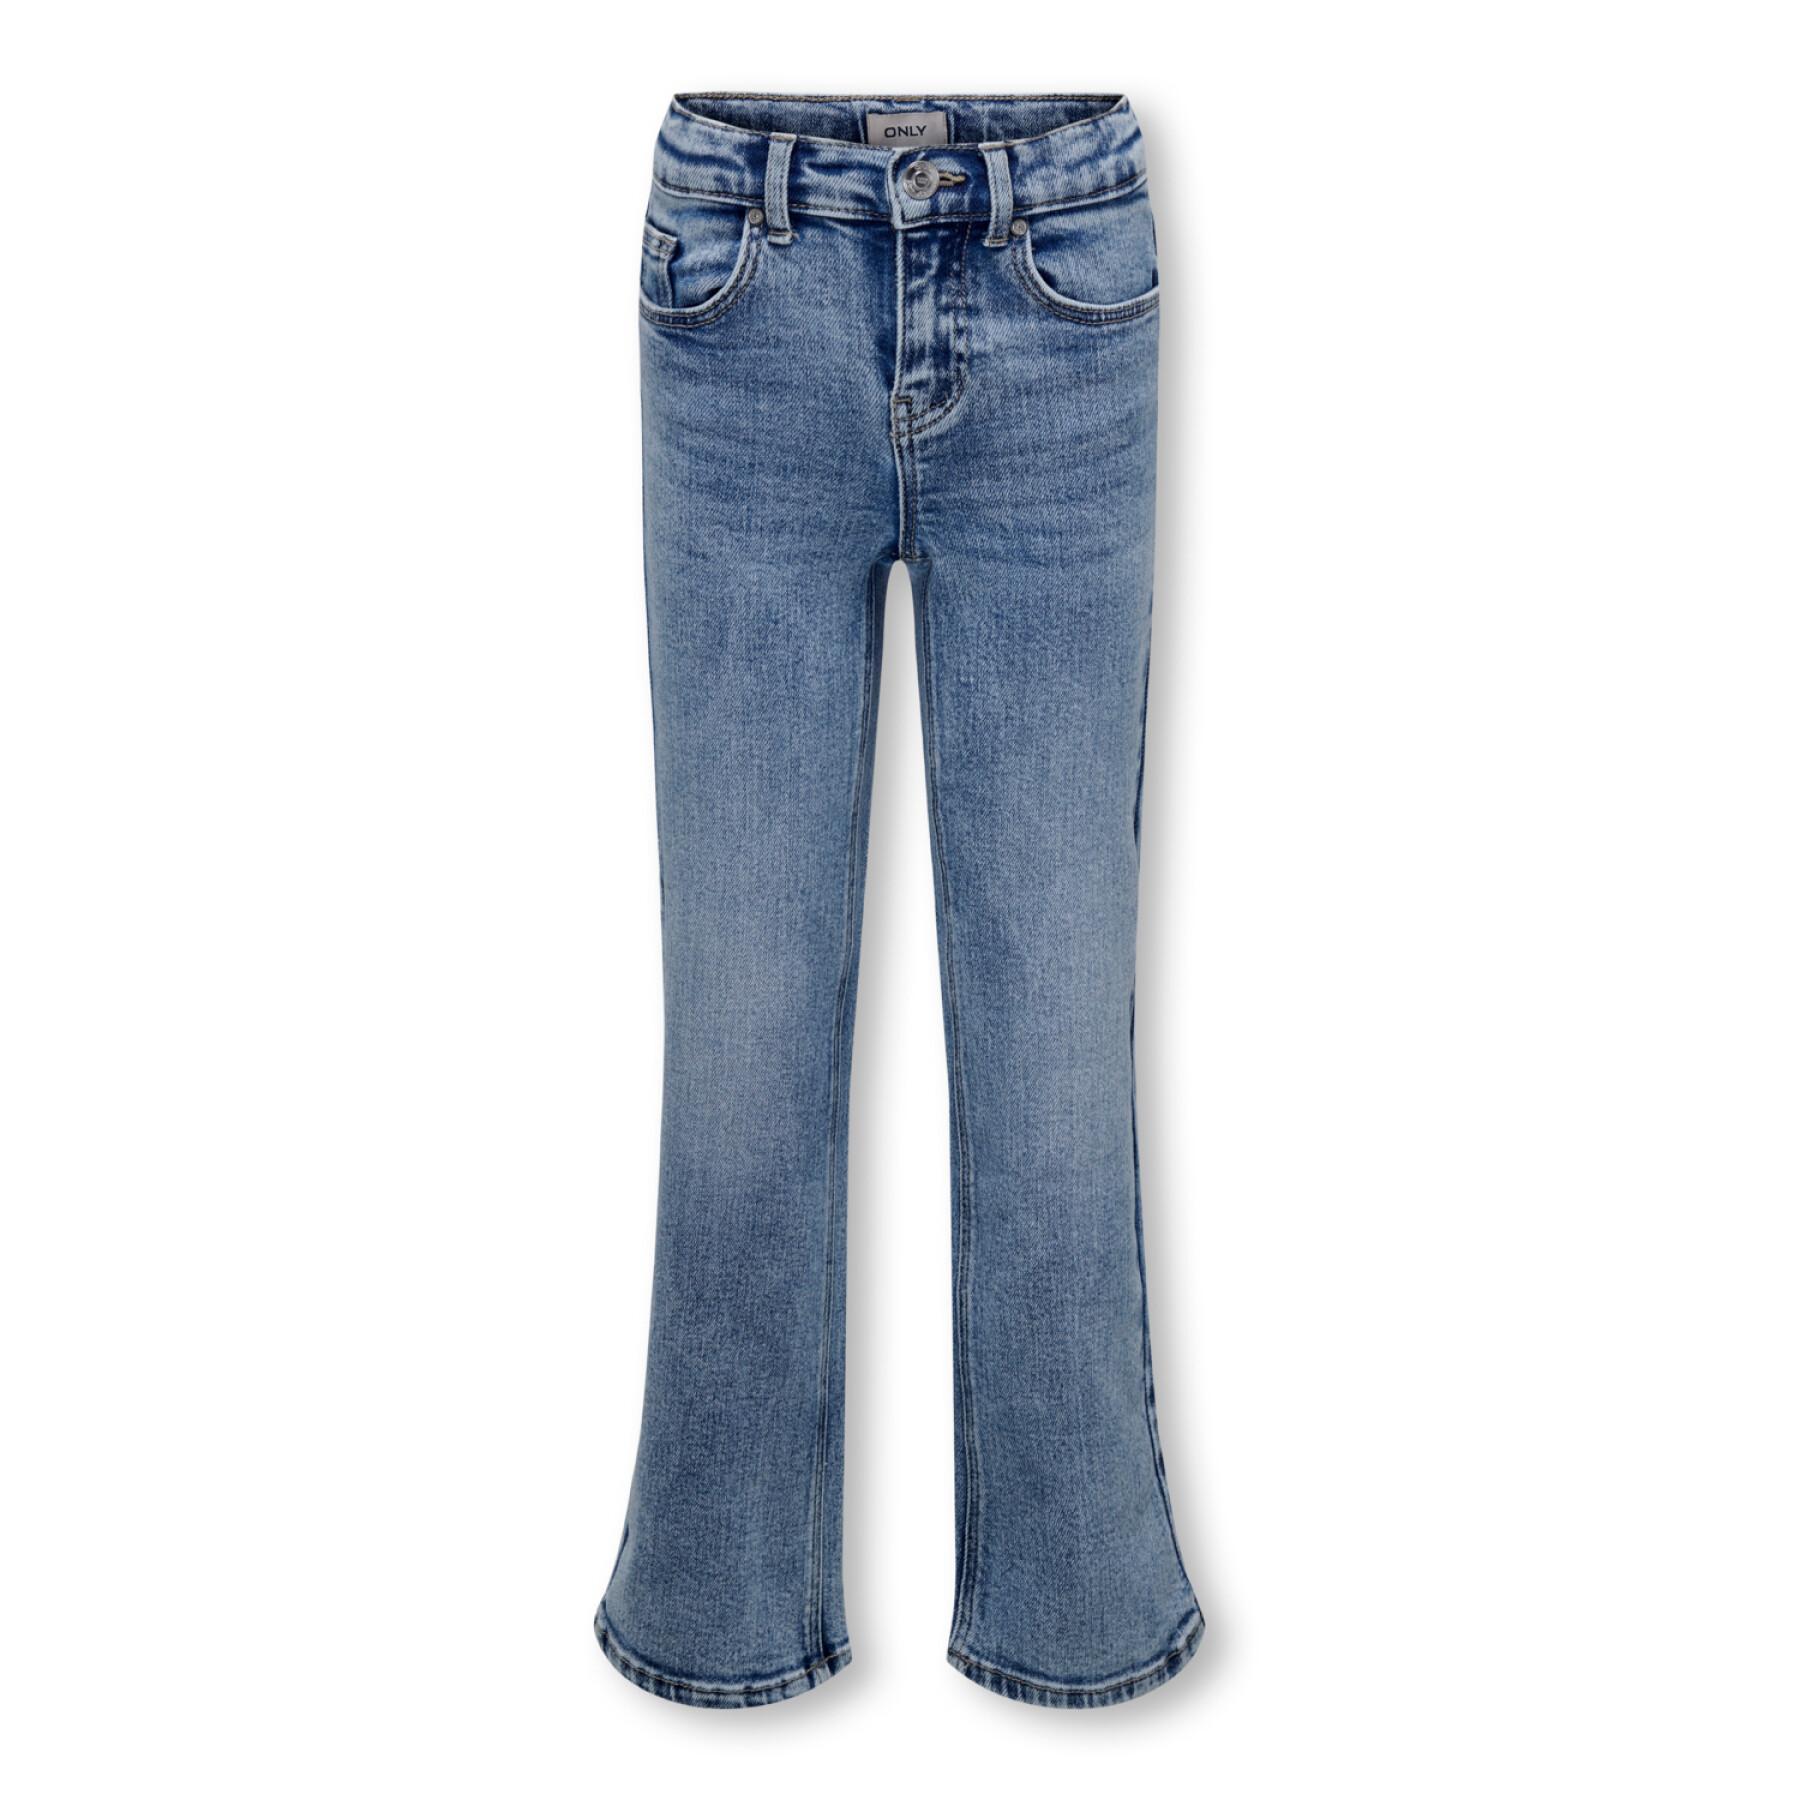 Jeans jambes larges fille Only kids Kogjuicy Pim560